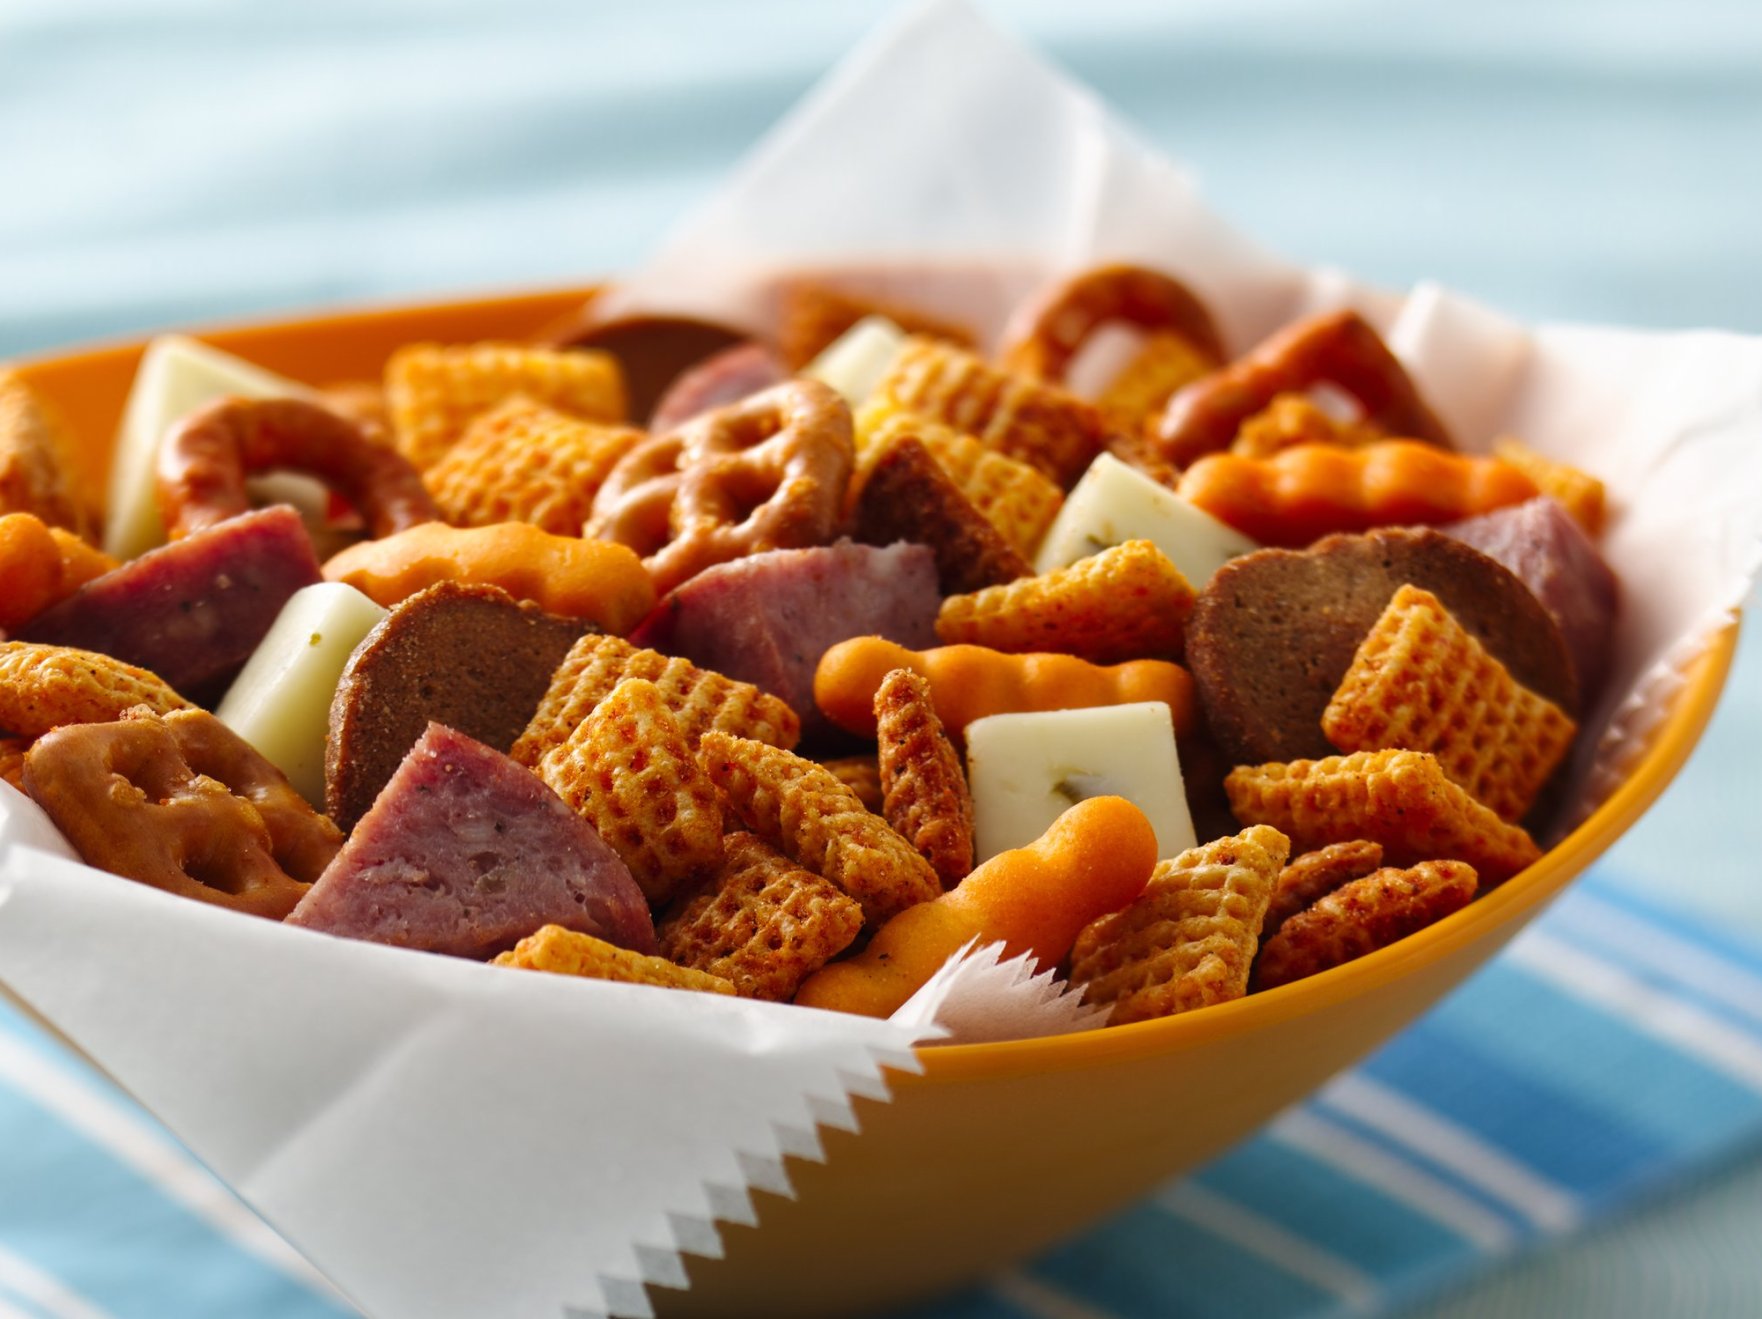 Different snacks in a bowl